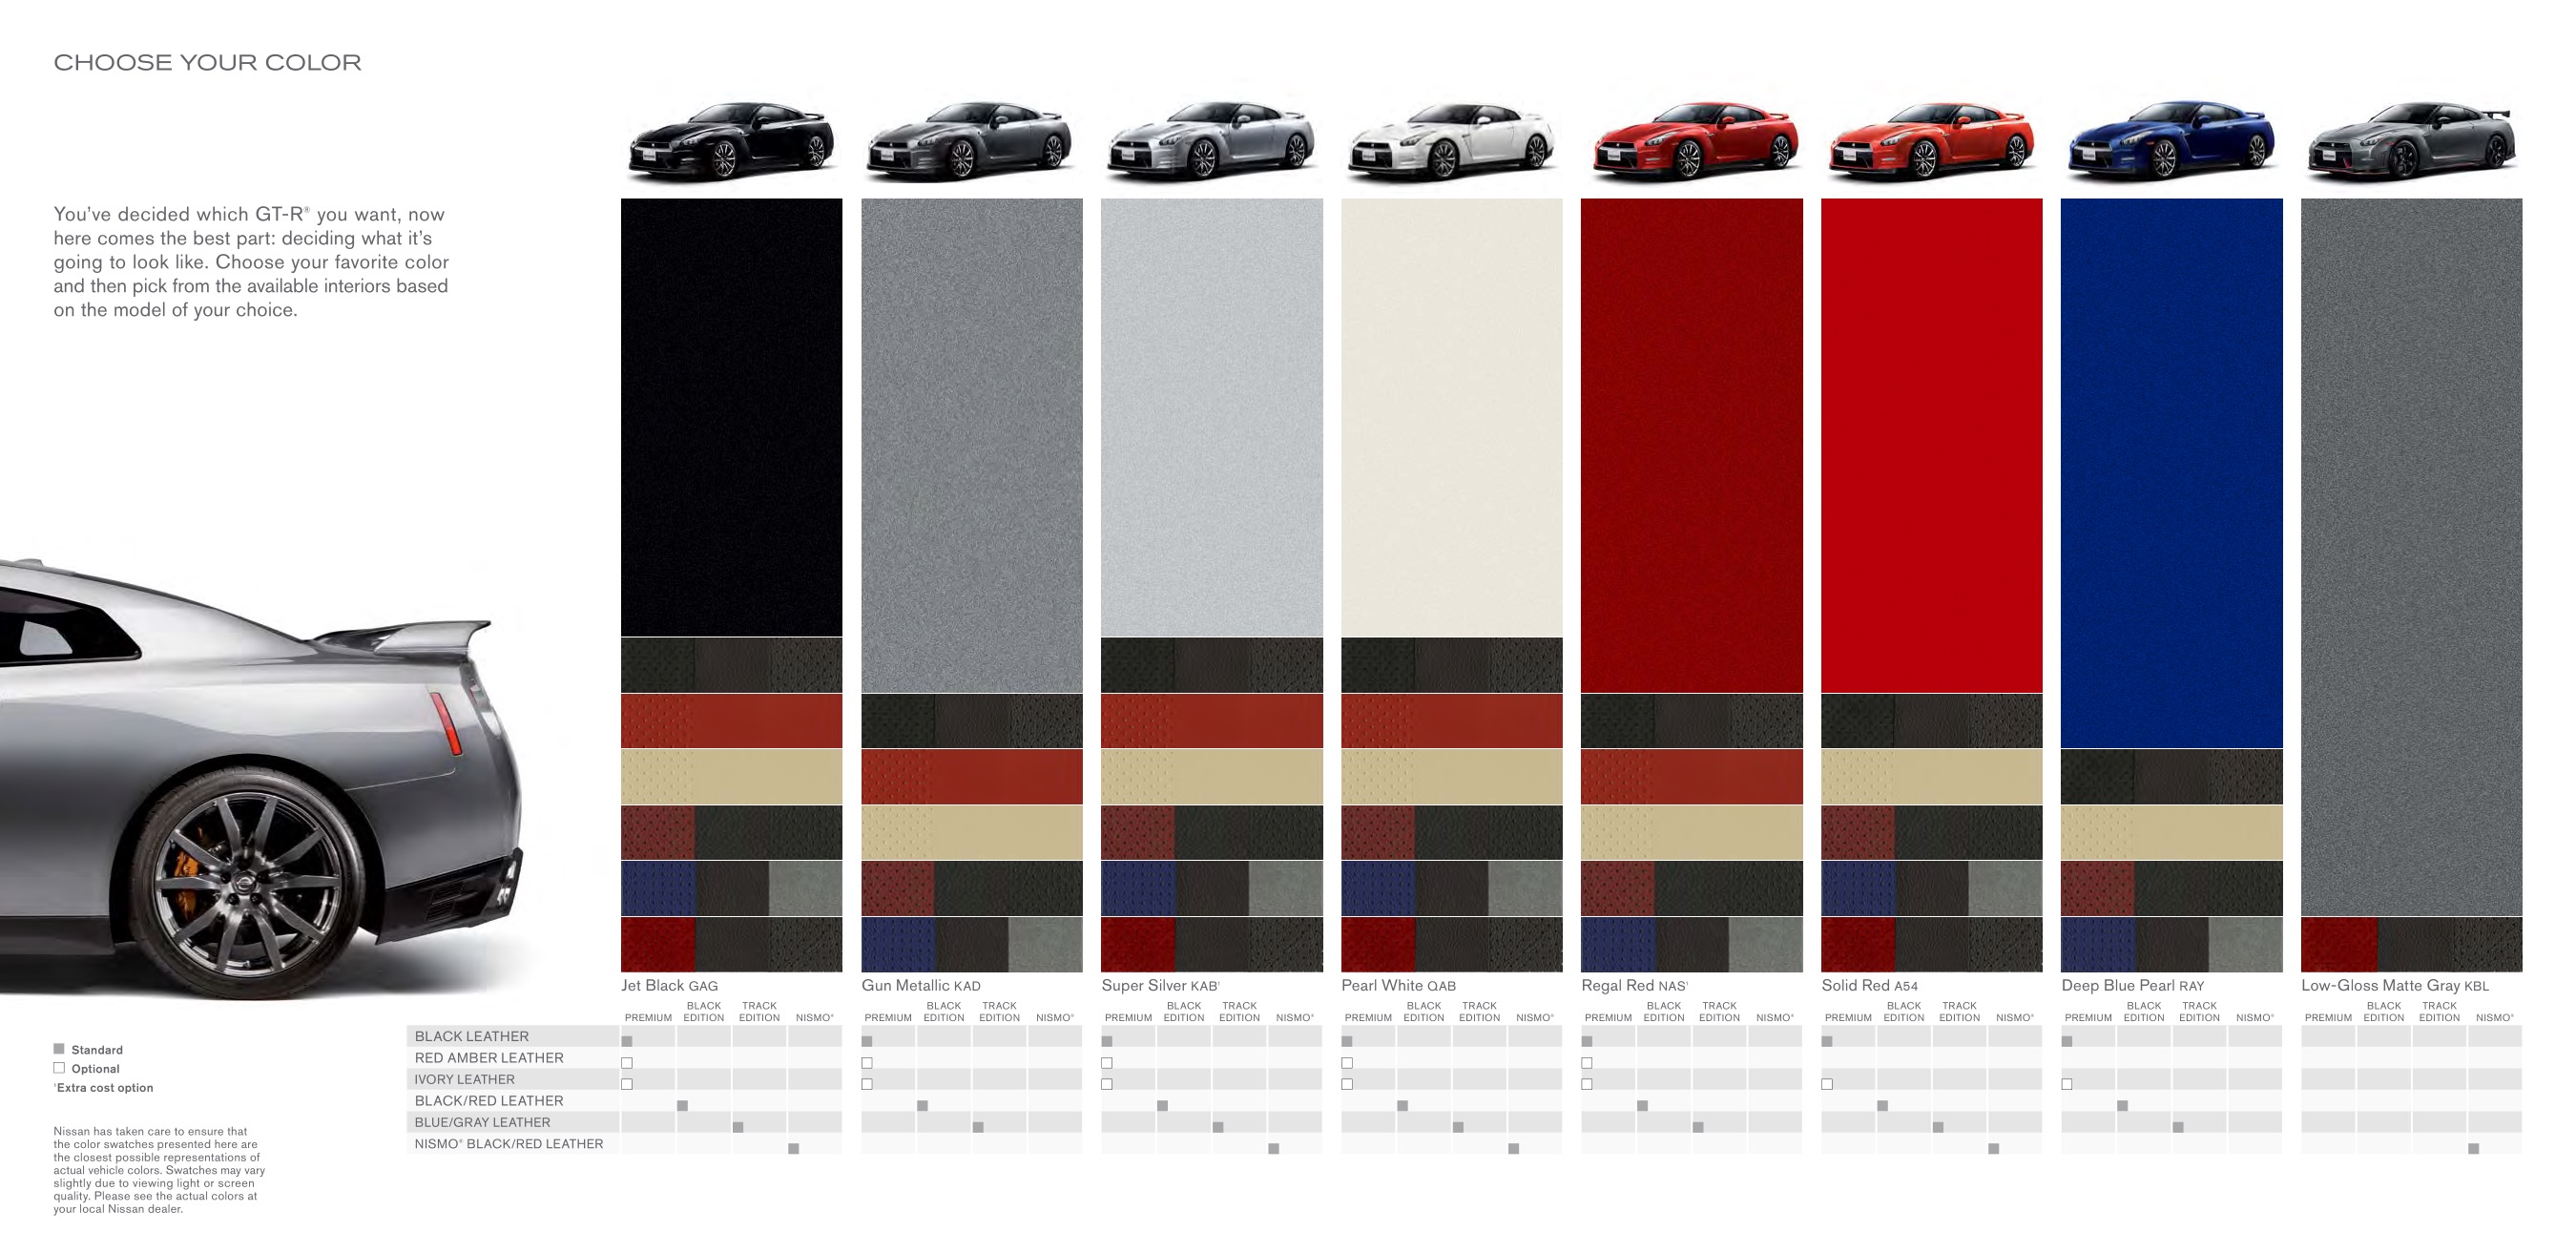 2015 Nissan GT-R Brochure Page 4